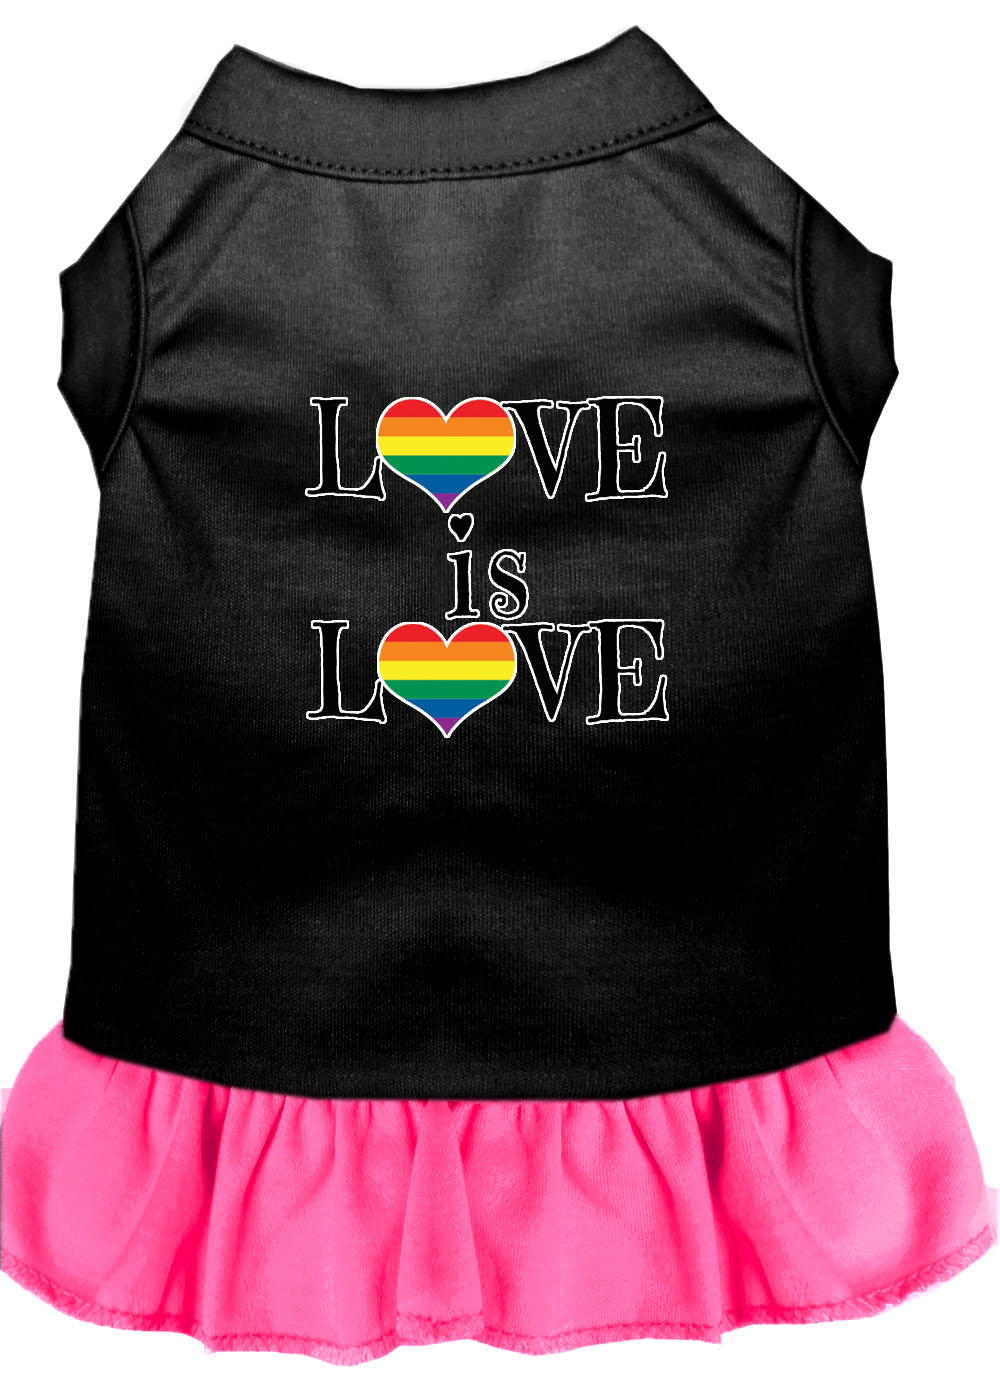 Love is Love Screen Print Dog Dress Black with Bright Pink XS